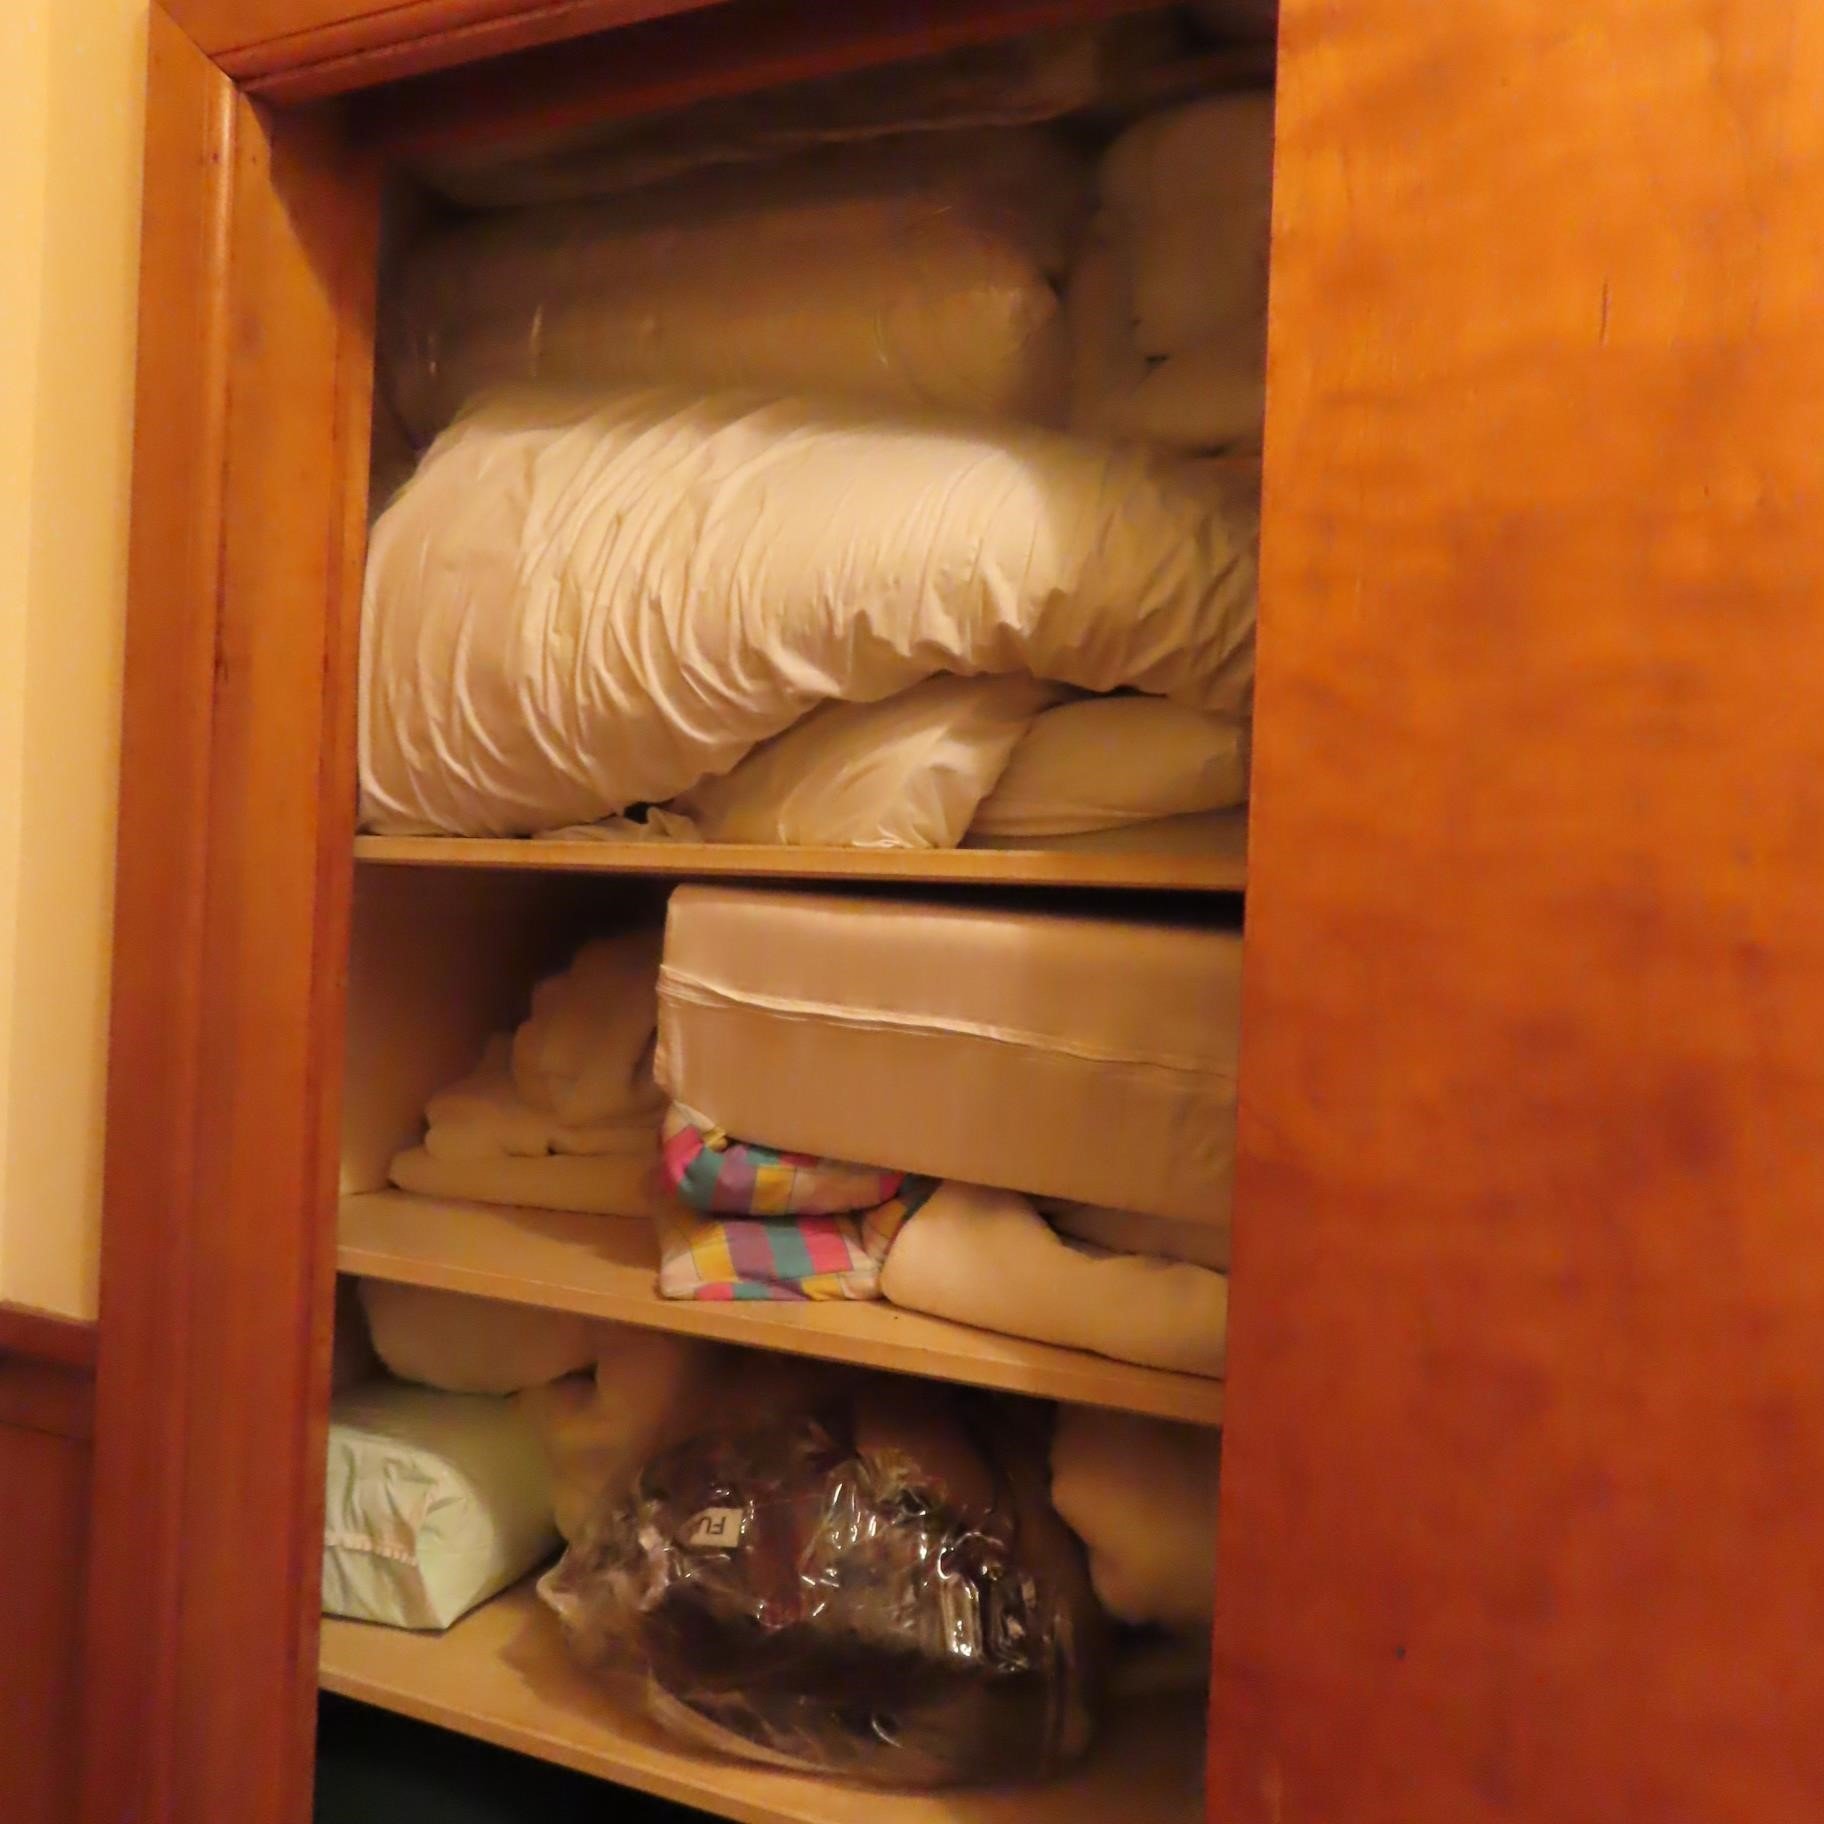 Contents of Linen Closet, Bedding and Blankets.